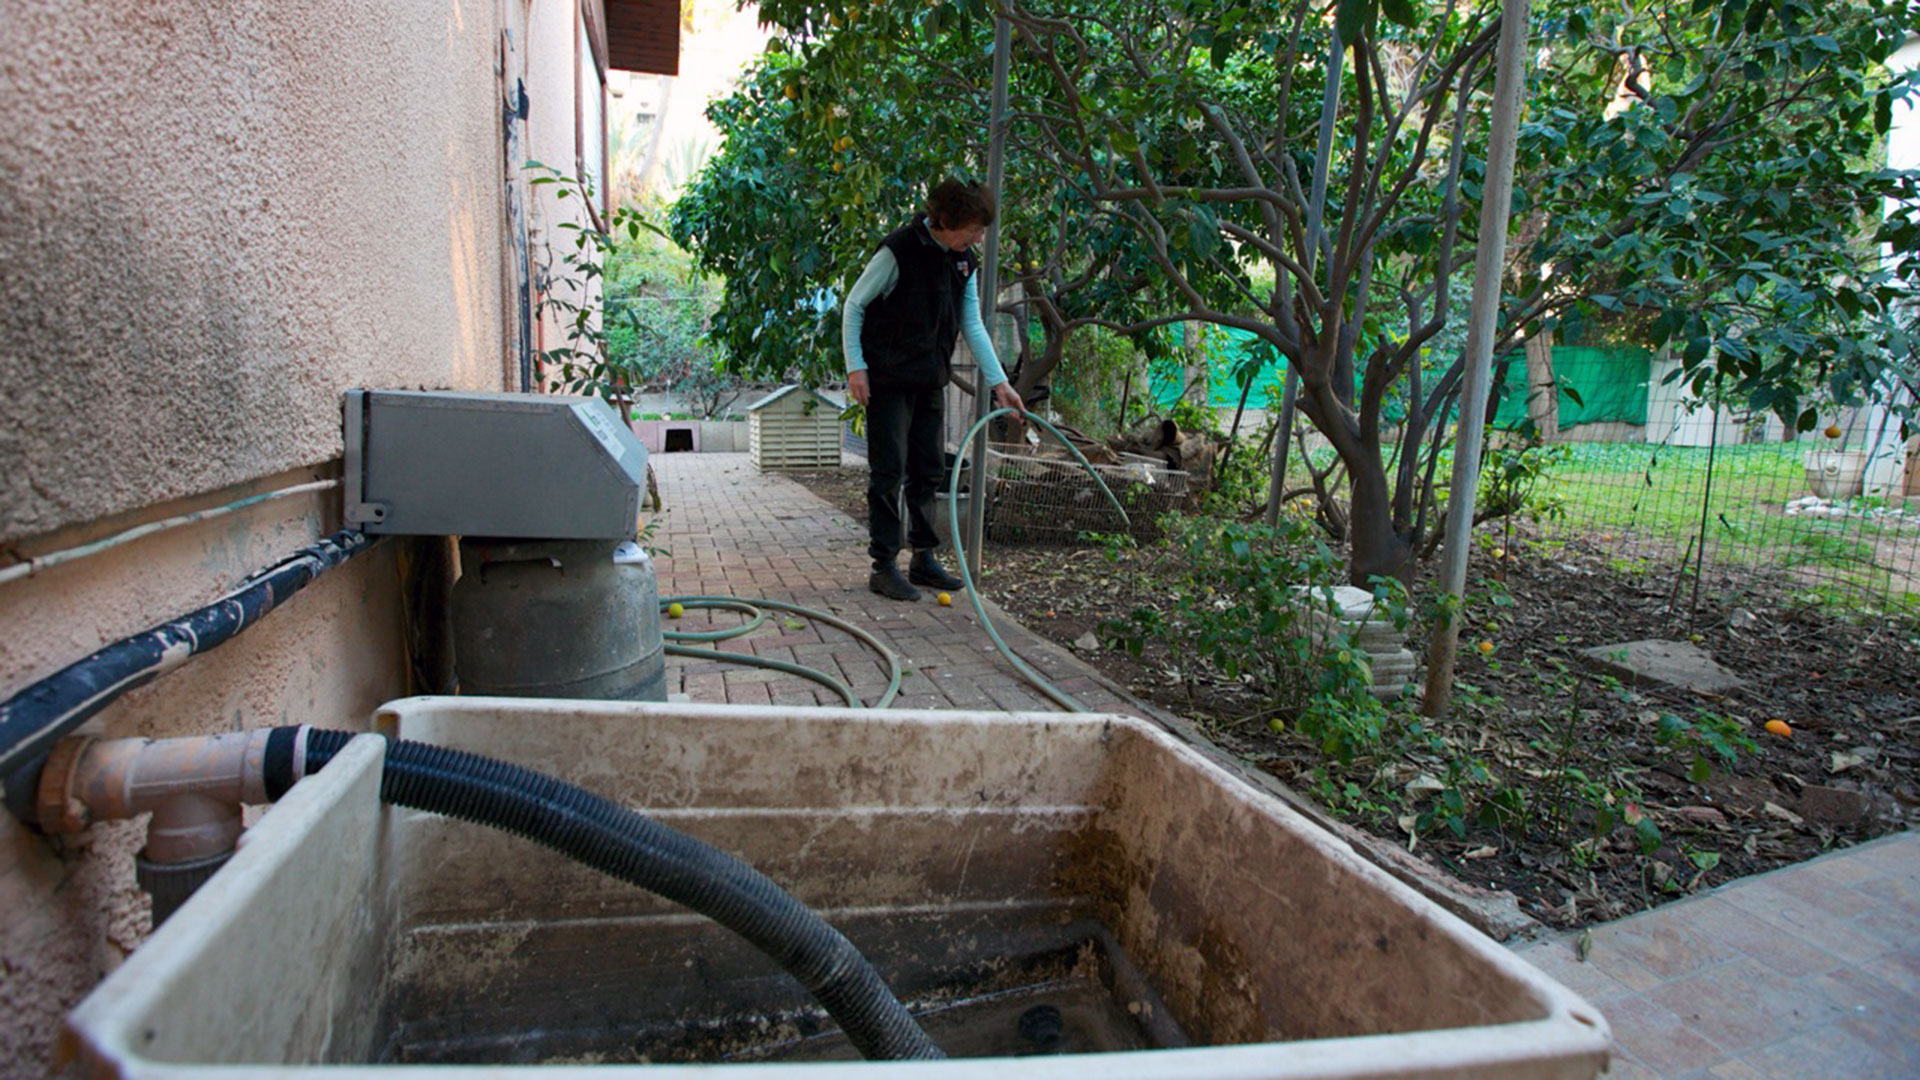 A woman holds a hose connected through a utility sink on the back of her house to water her lawn